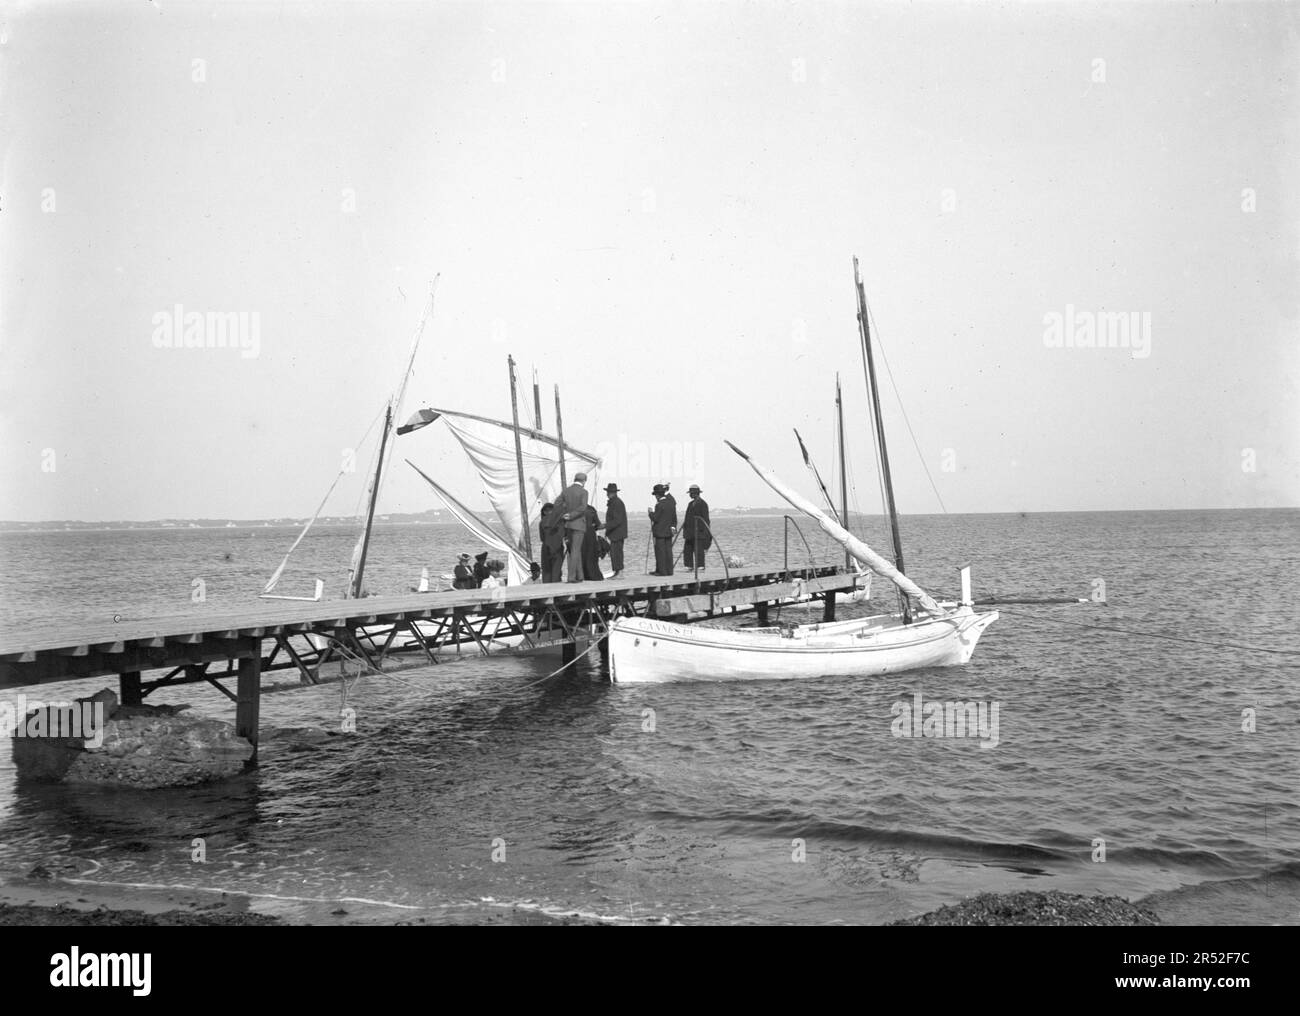 Group of men on a pontoon, next to a boat with 'Cannes' writed on it. Beginning of 20th century.This is an old photo digitized from glass plates. Stock Photo